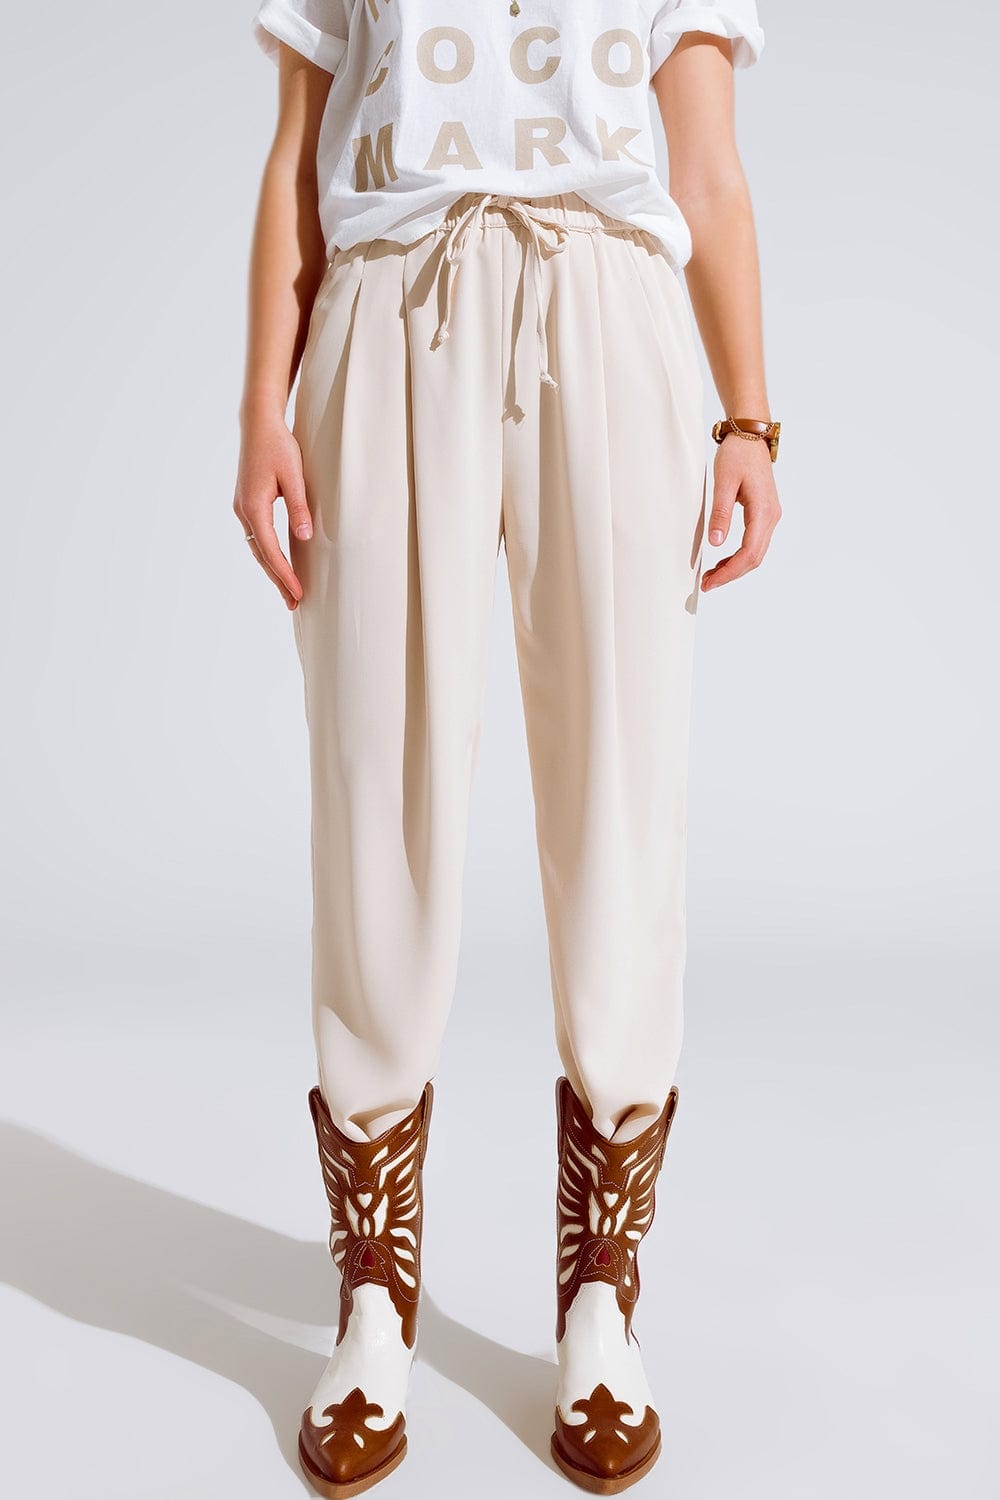 Q2 Women's Pants & Trousers Pants In Beige With Front Pockets And Drawstring Closing